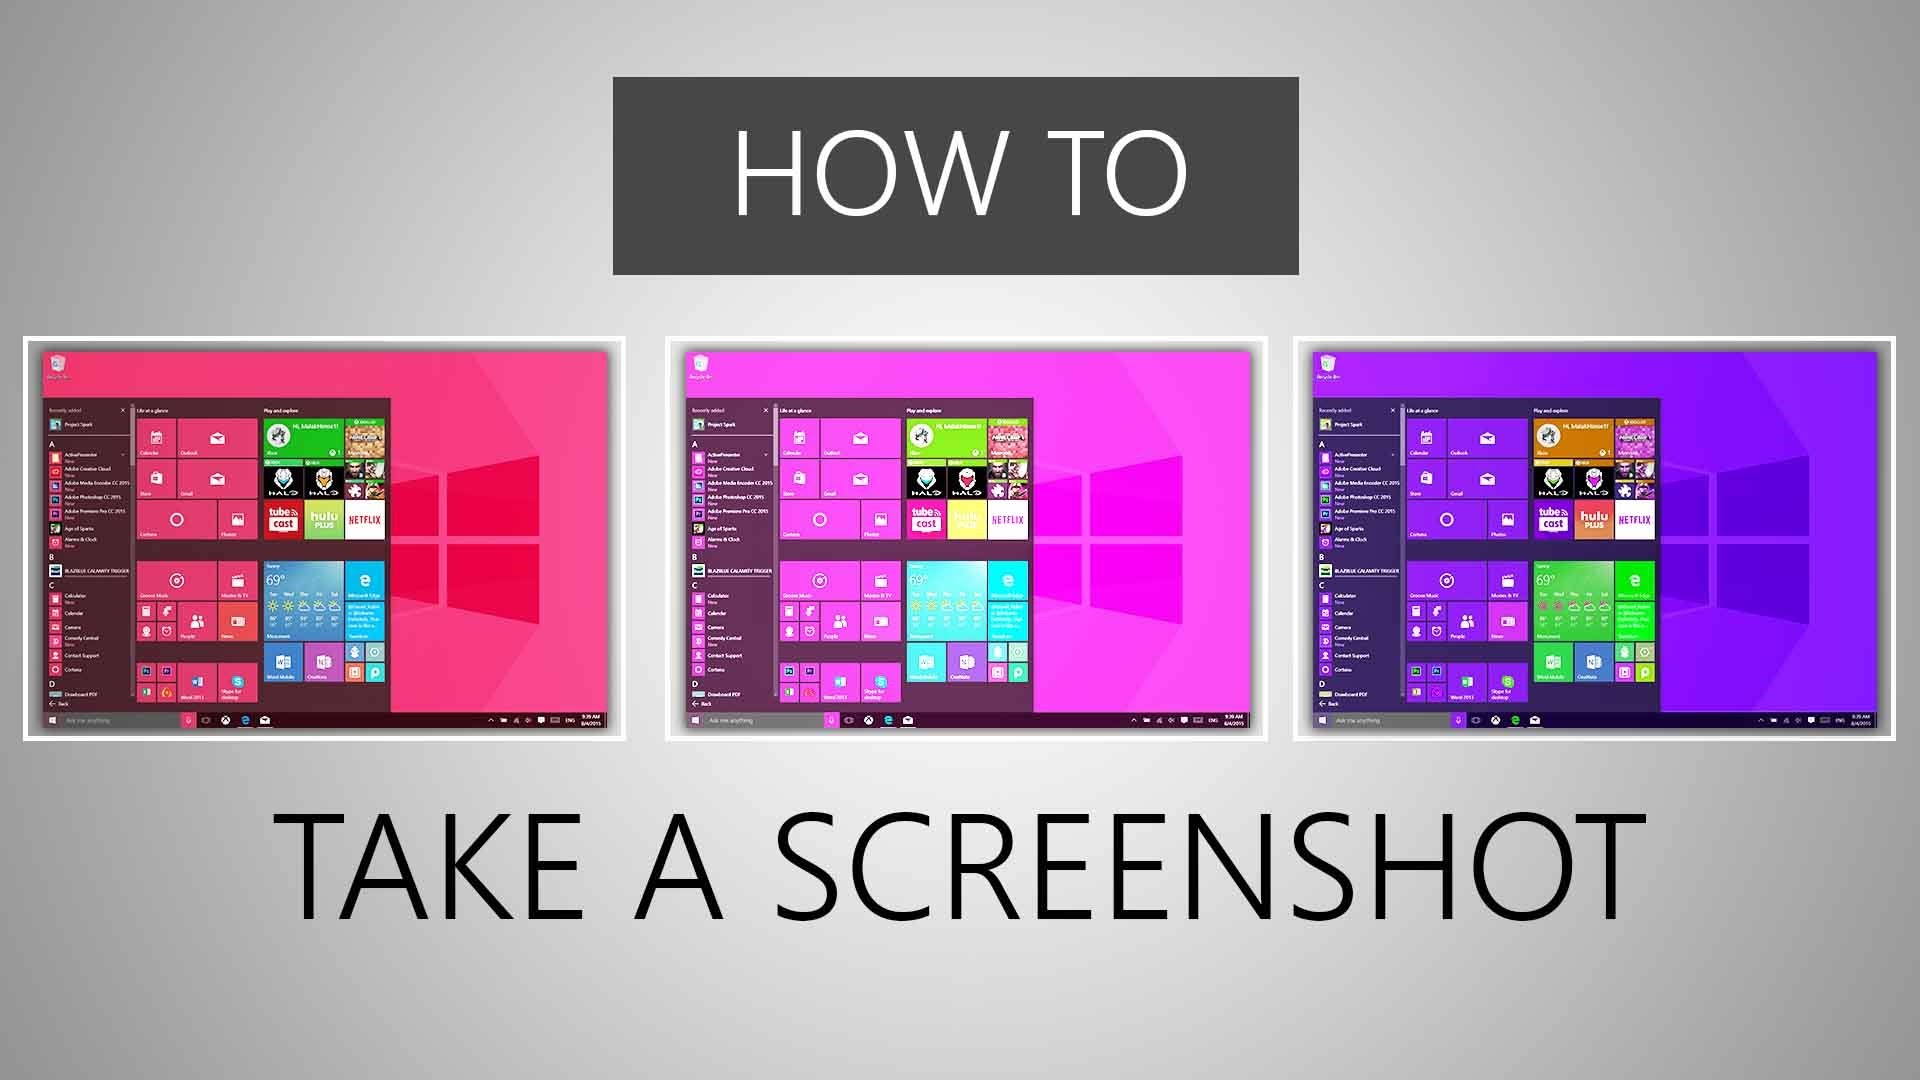 The Complete Guide on How to Take Screenshot in Windows 10